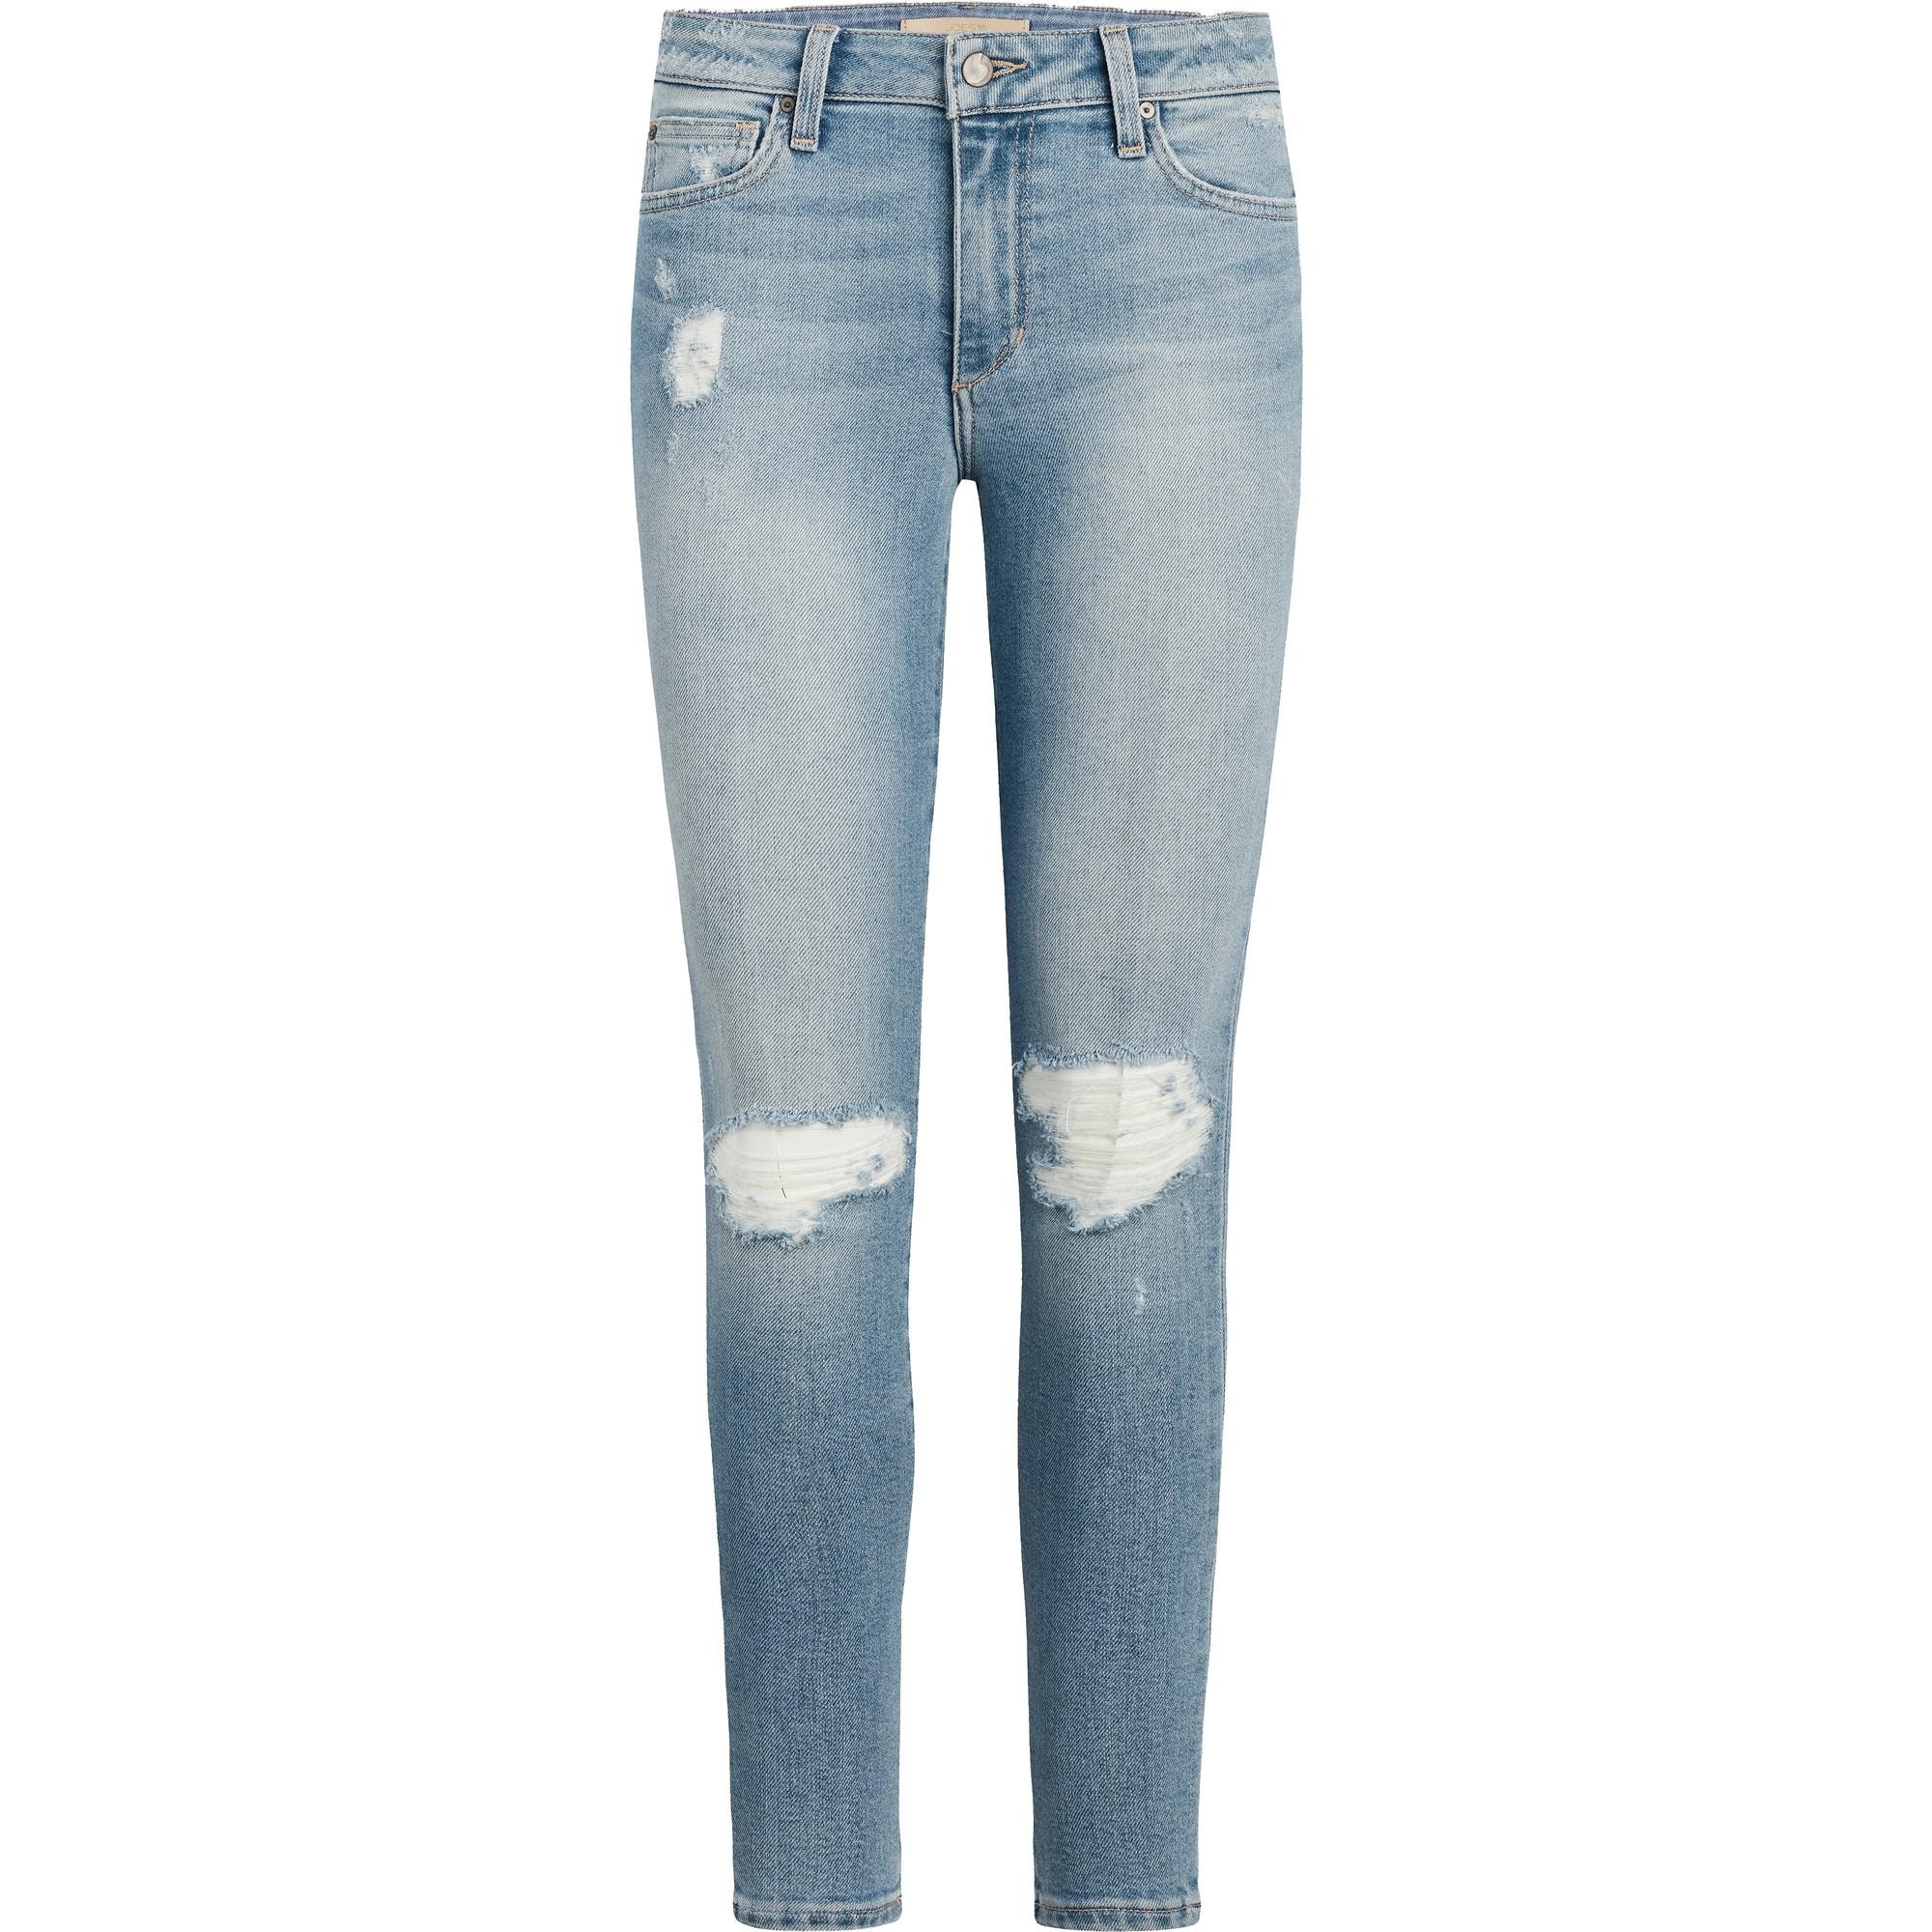 ankle length skinny jeans